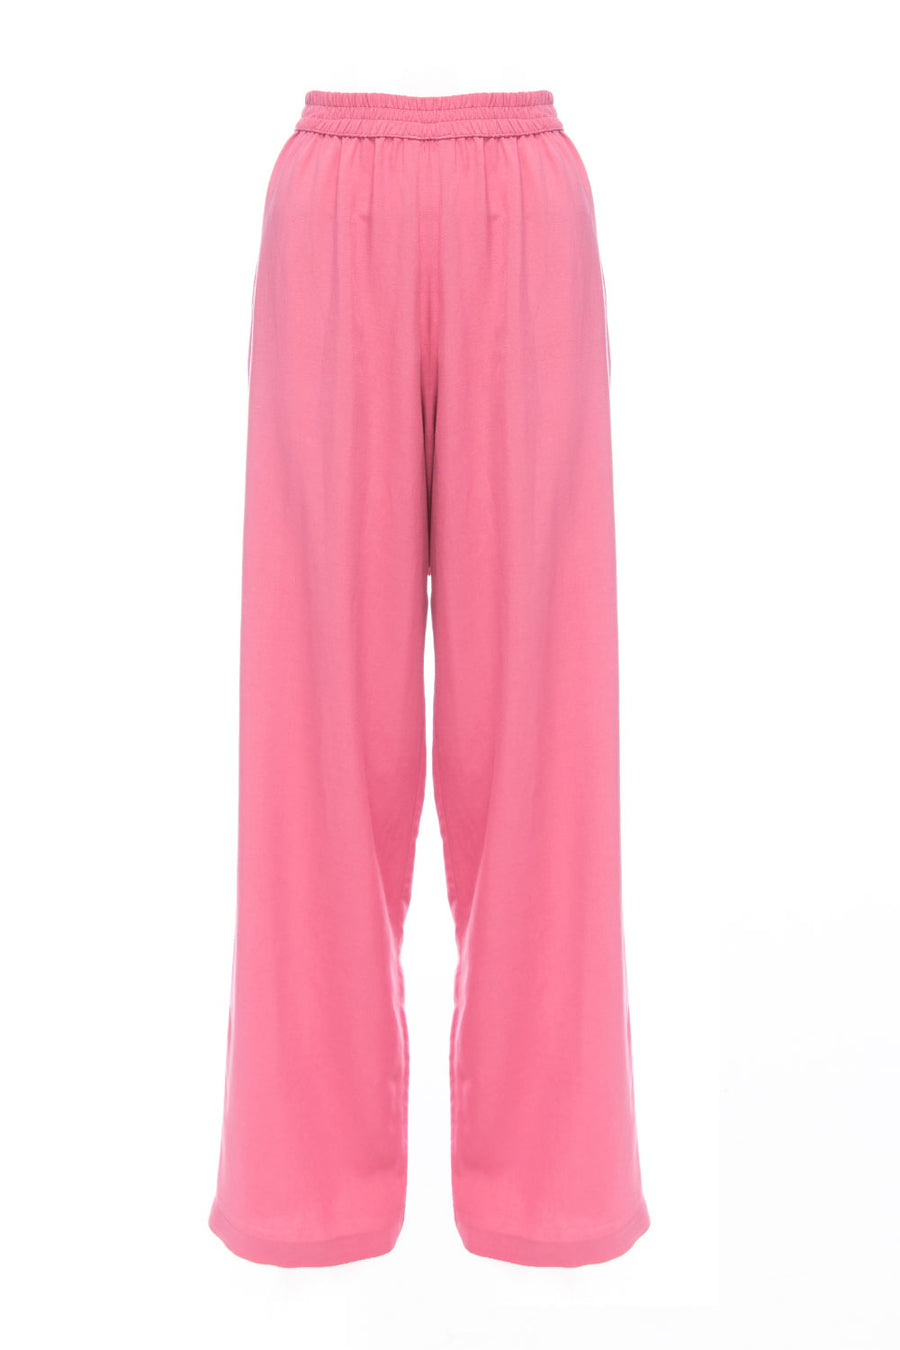 Thea linen pant - Dusty pink